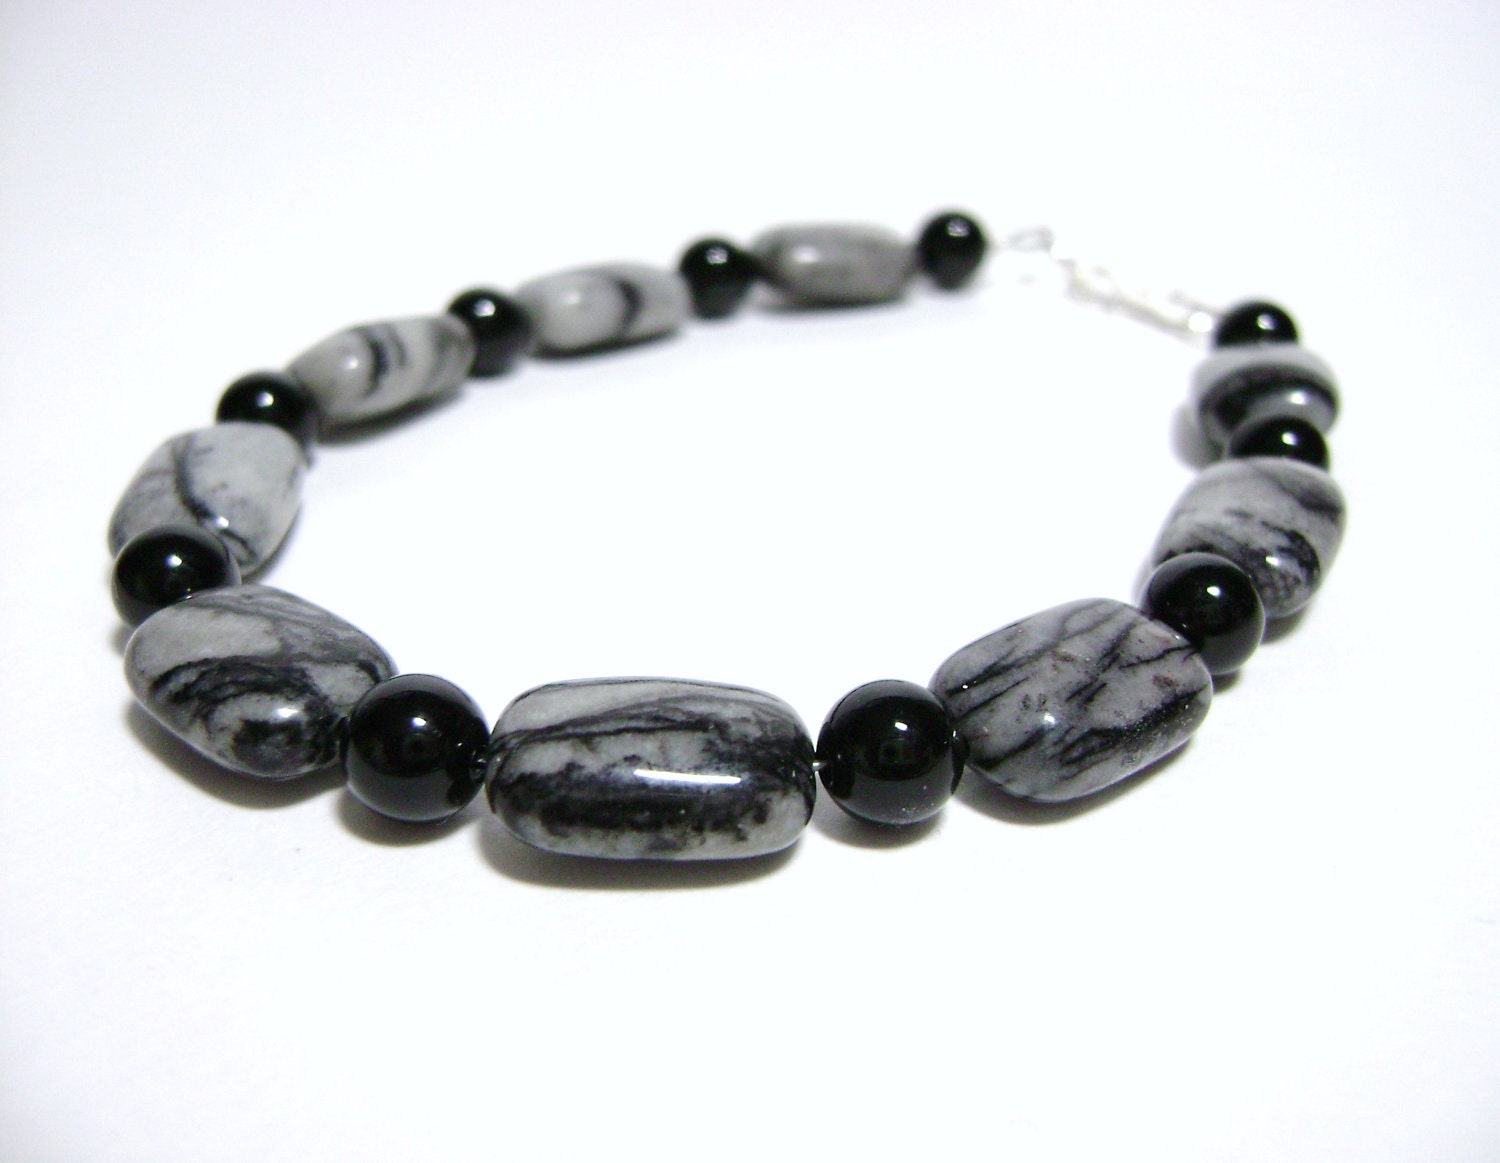 Zebra Jasper and Black Onyx bracelet with Sterling Silver rings and clasp